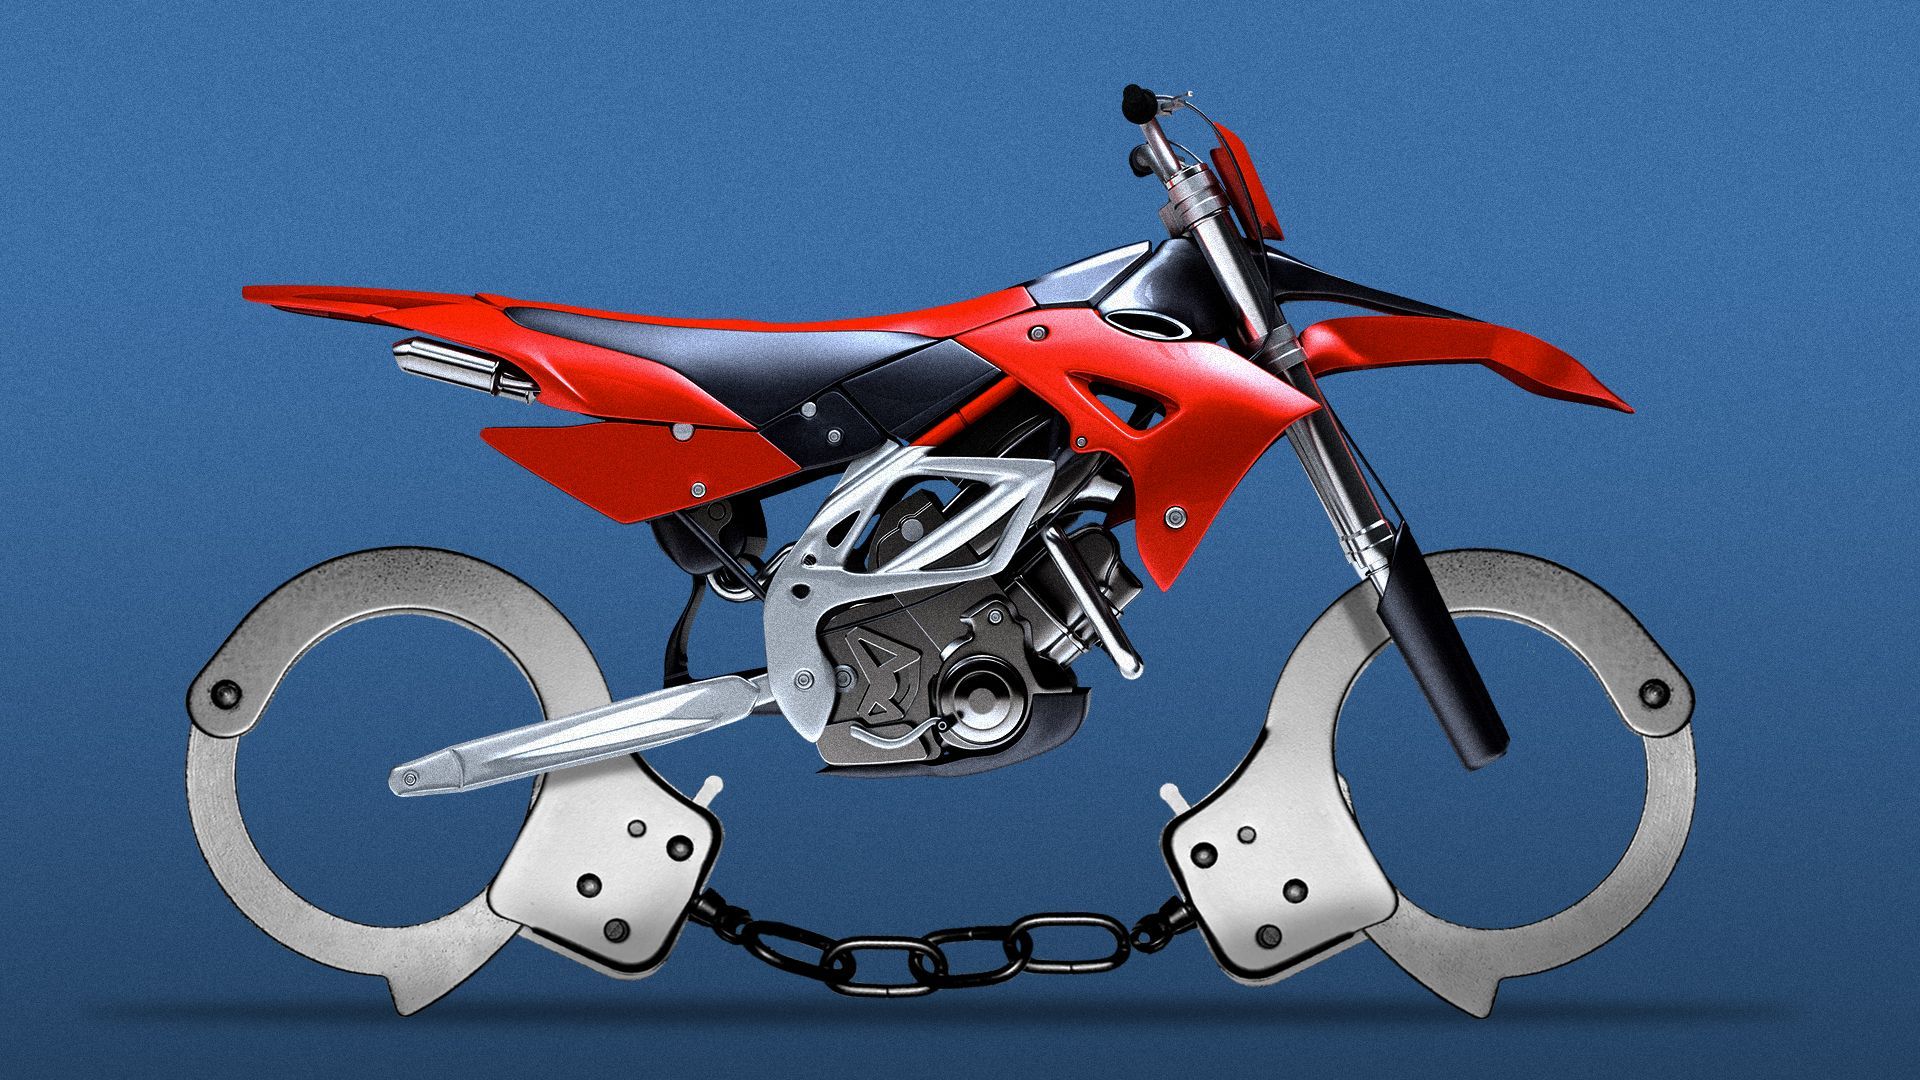 Illustration of a dirt bike with handcuffs in place of the wheels.